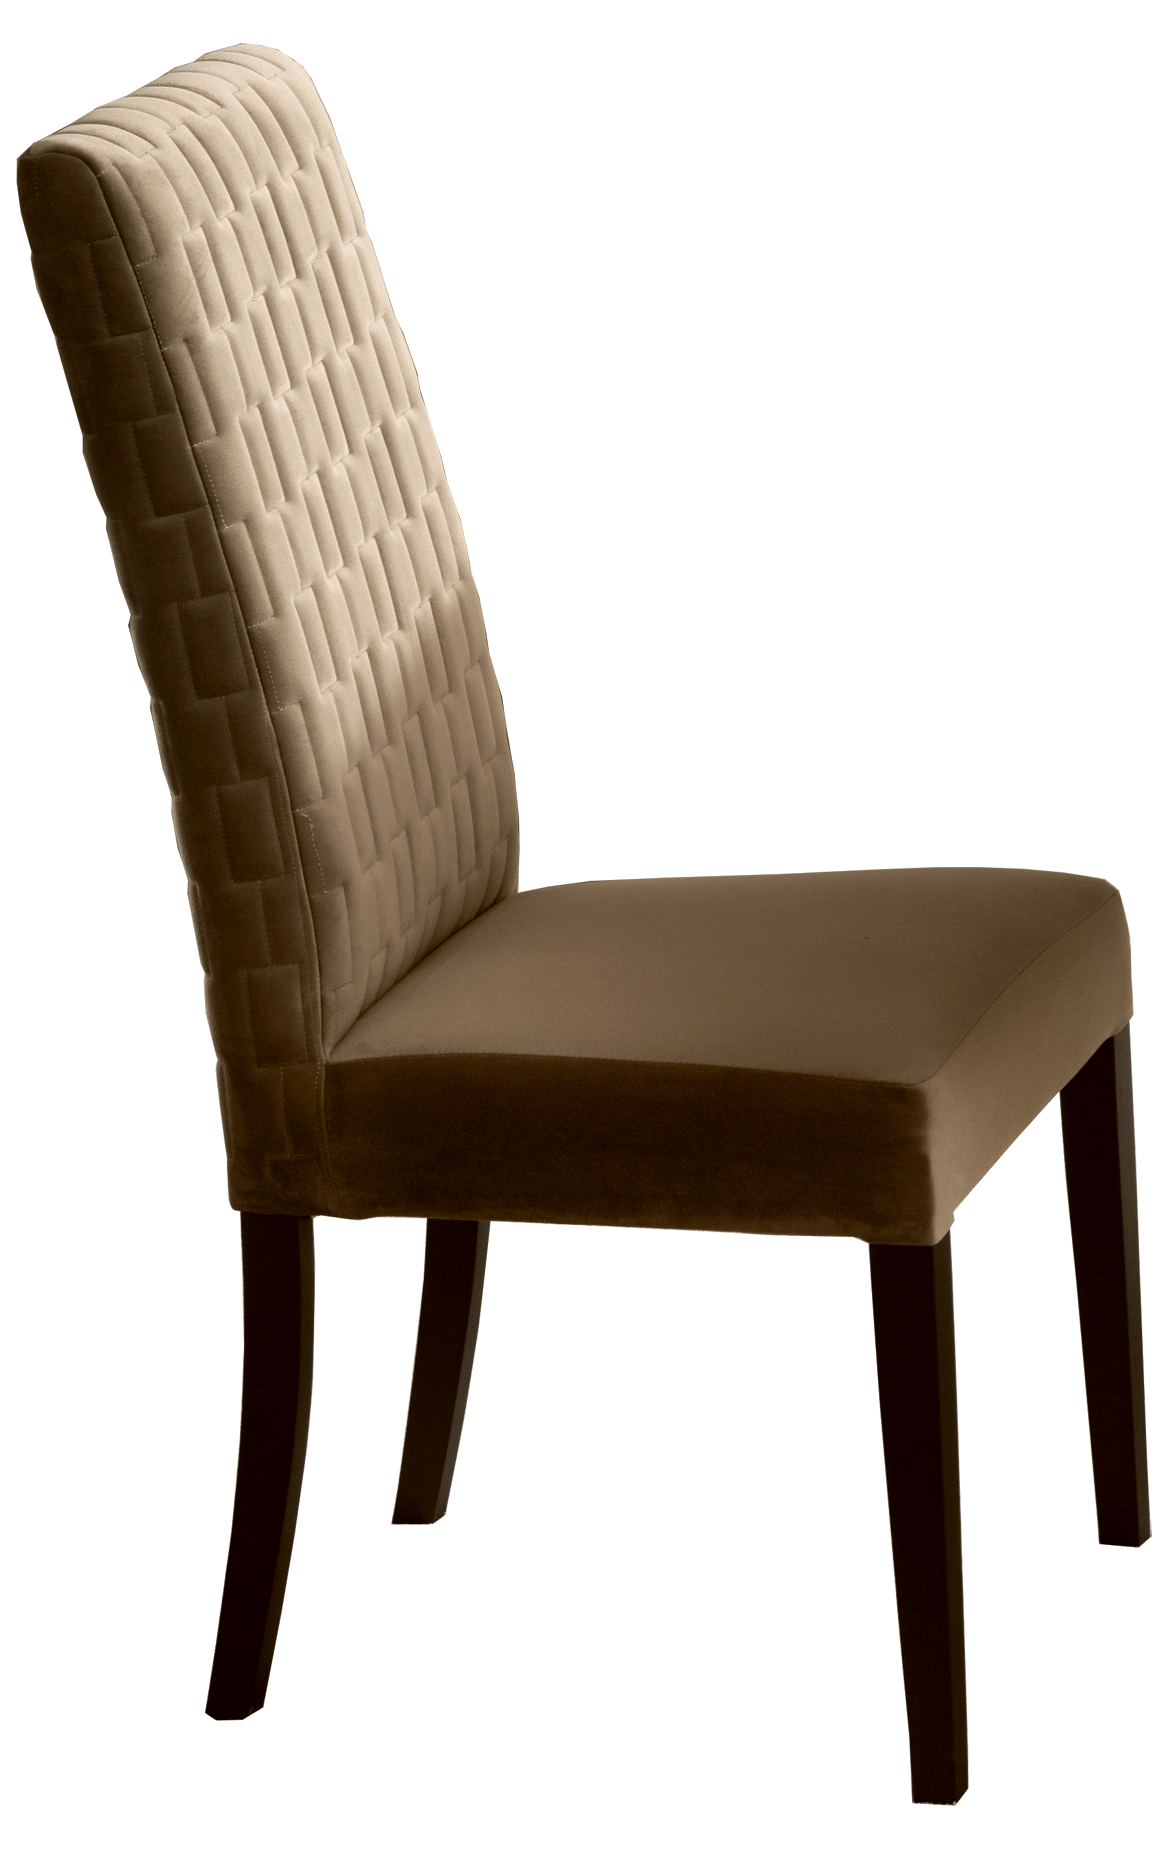 Brands Arredoclassic Living Room, Italy Poesia Dining Chair by Arredoclassic